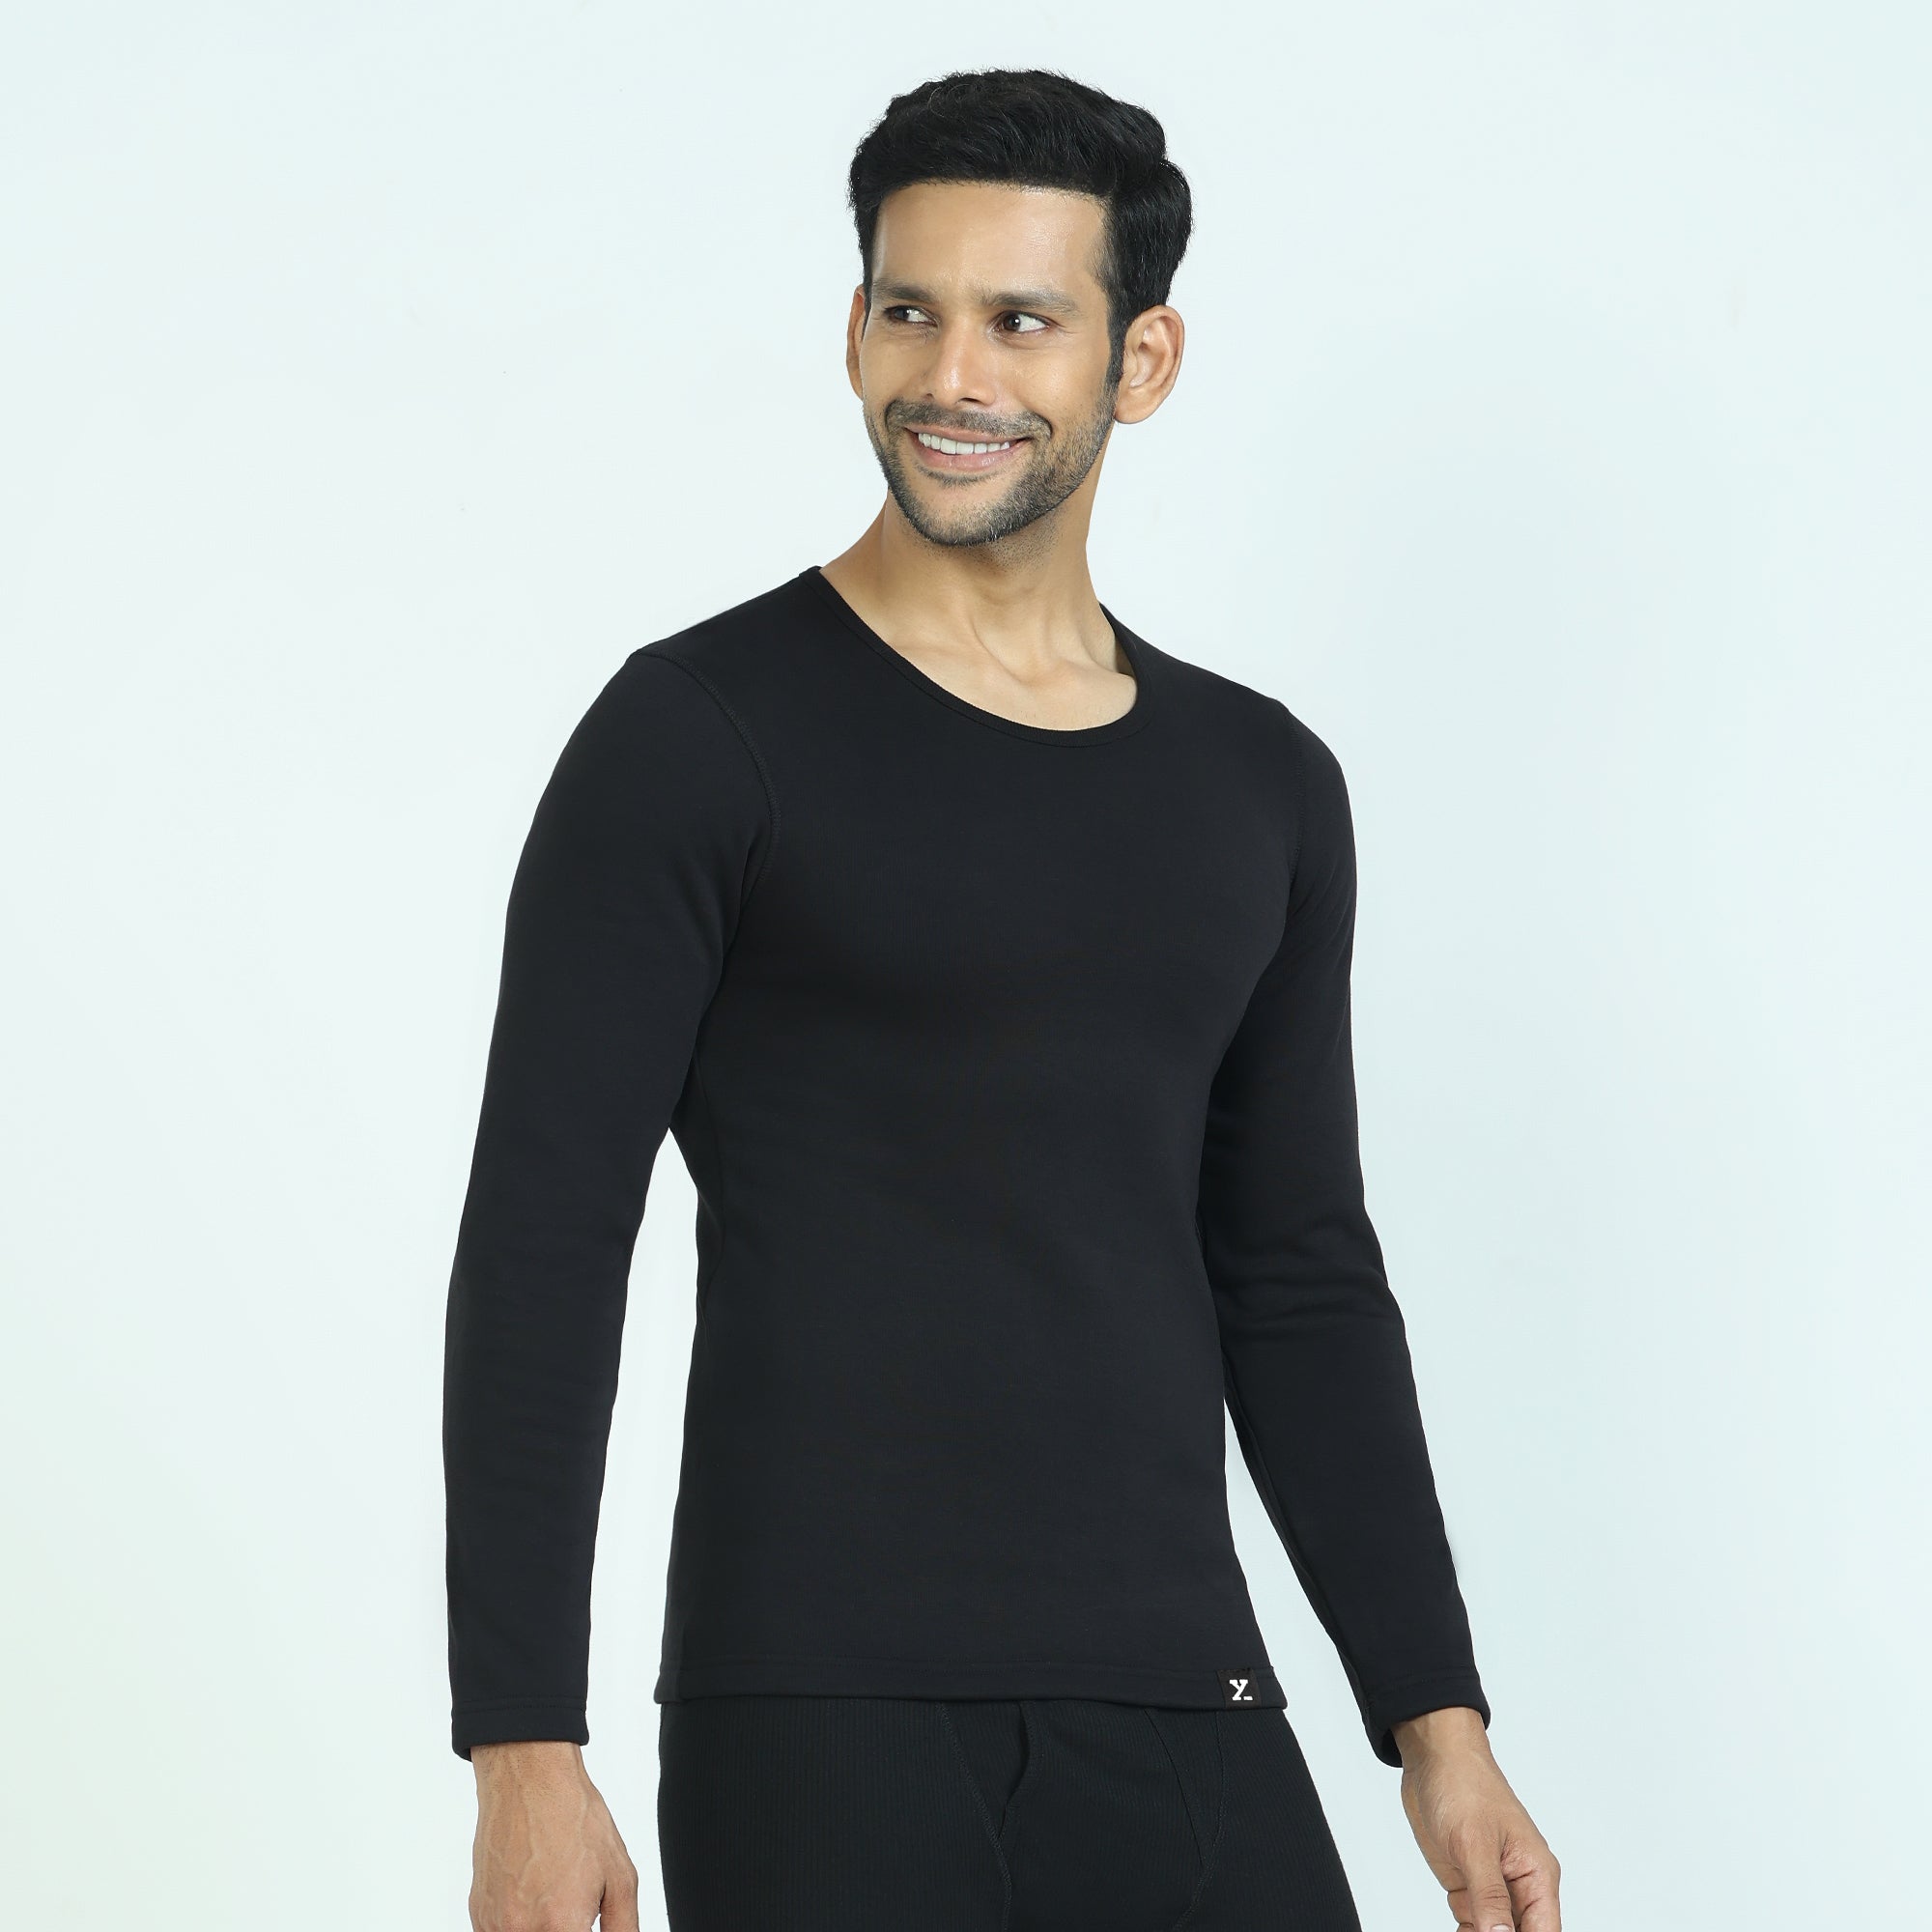 Thermal Shirt, Long Johns - clothing & accessories - by owner